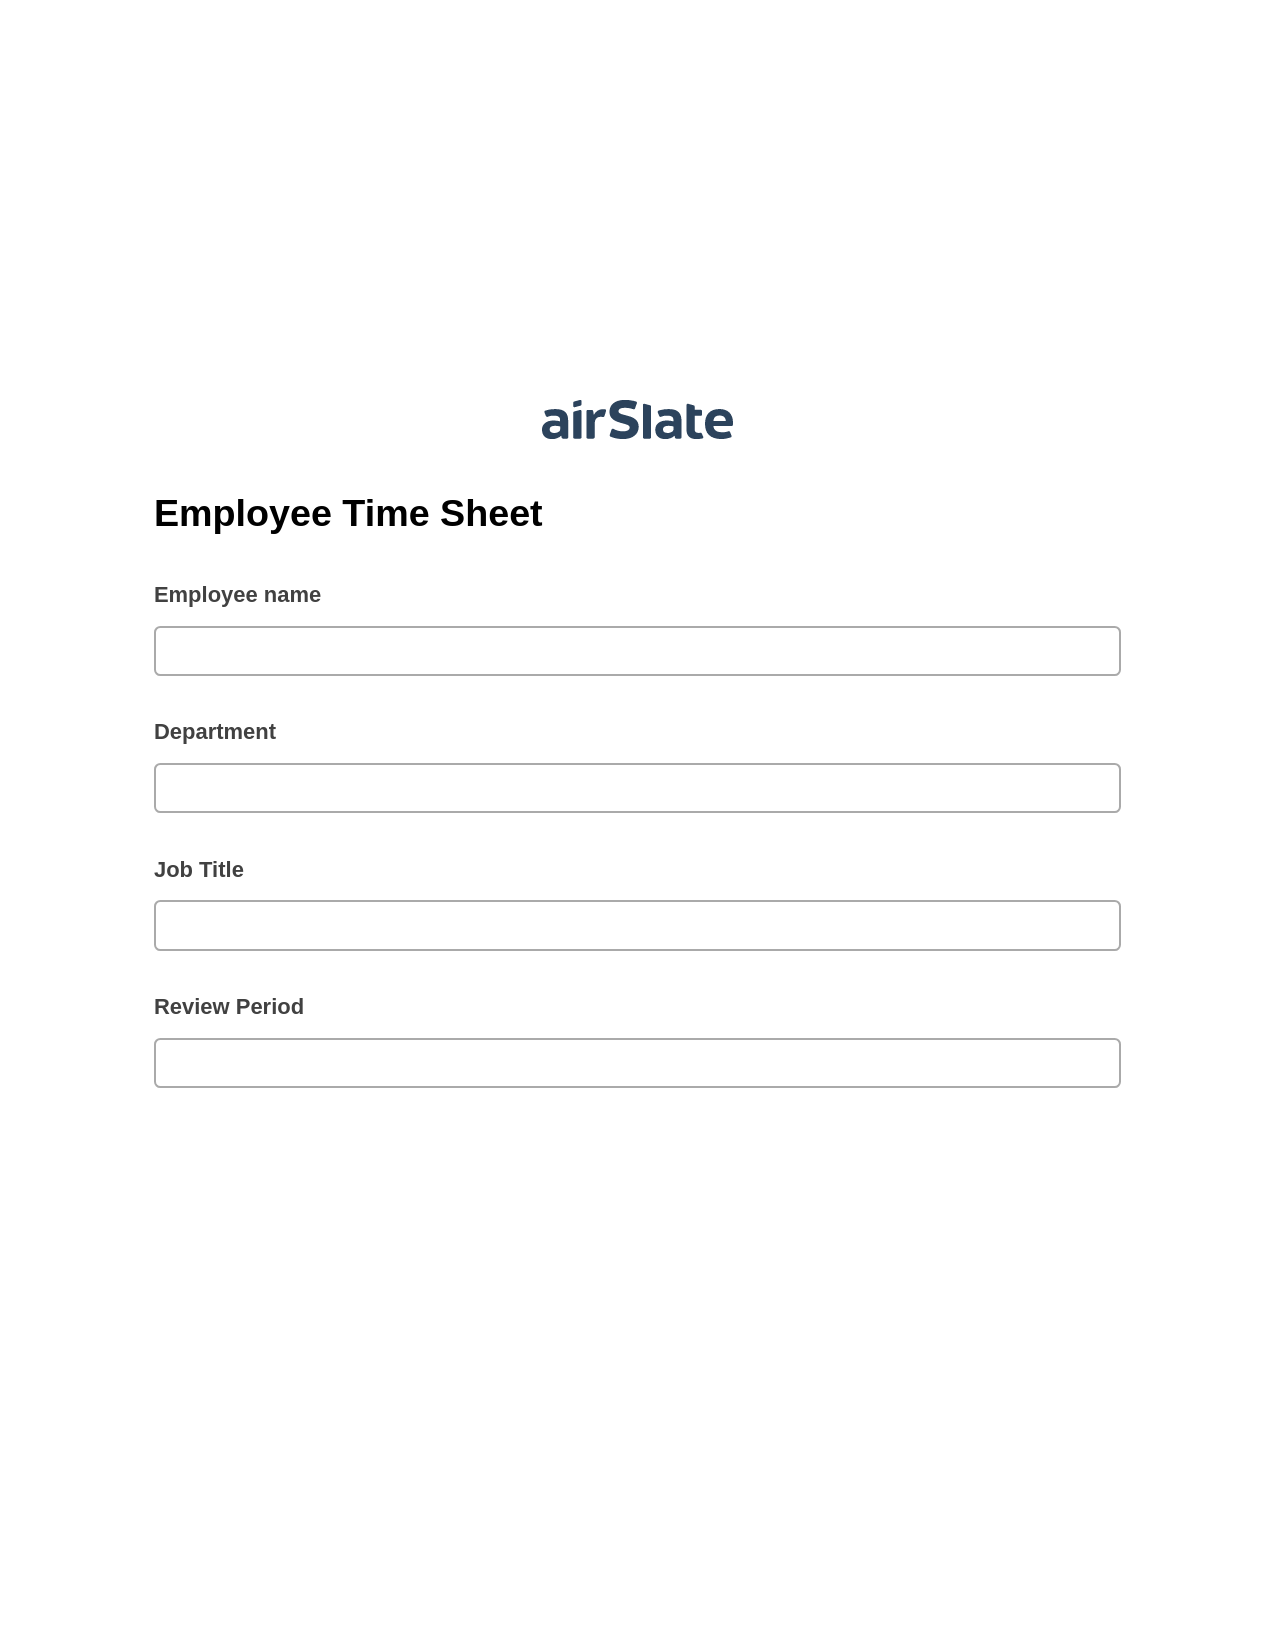 Multirole Employee Time Sheet Pre-fill from Google Sheets Bot, Send a Slate with Roles Bot, Archive to SharePoint Folder Bot